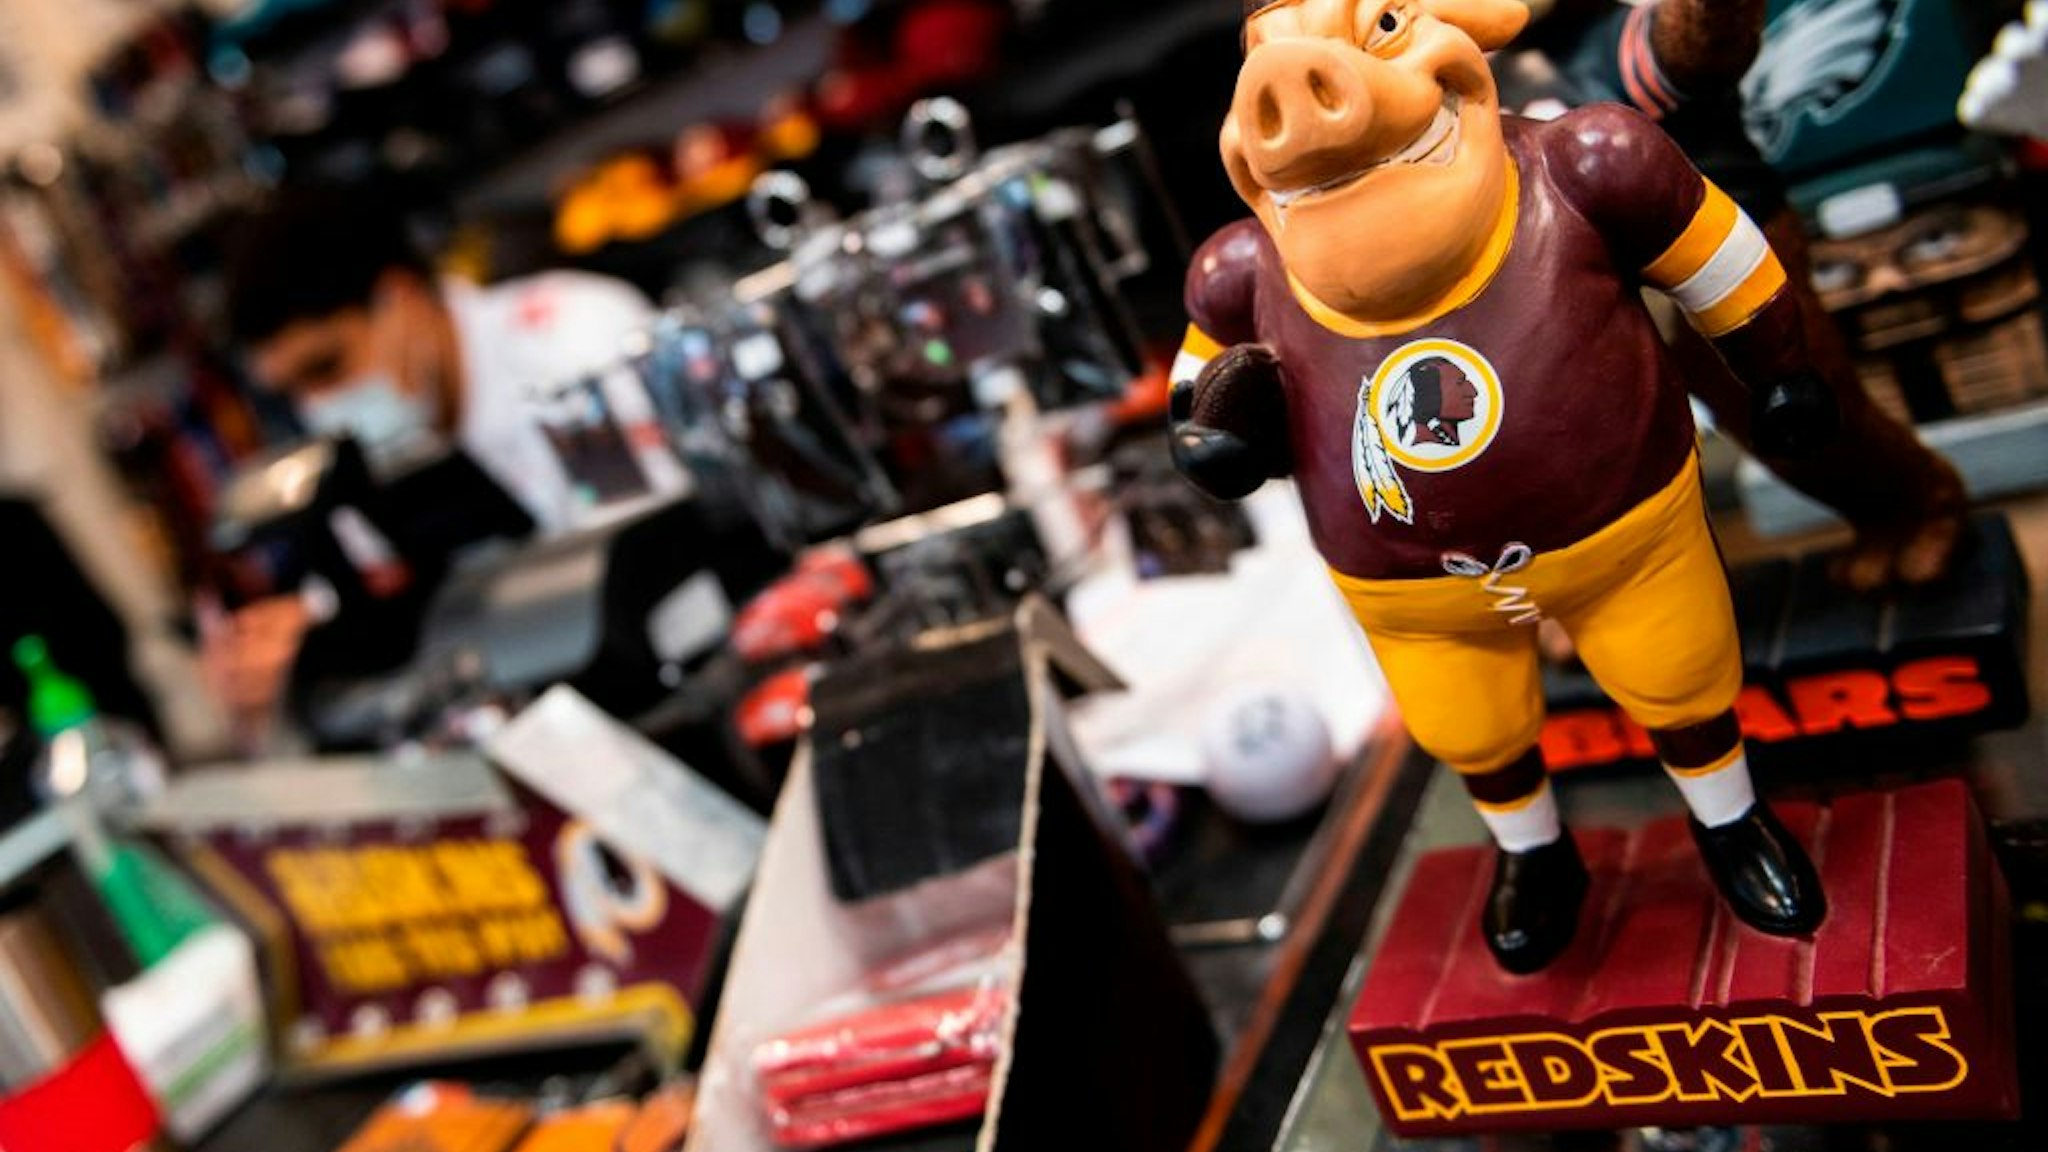 Washington Redskins merchandise is seen for sale at a sports store in Fairfax, Virginia on July 13, 2020. - The Washington Redskins confirmed on July 13 that the team is changing its name following pressure from sponsors over a word widely criticized as a racist slur against Native Americans. (Photo by ANDREW CABALLERO-REYNOLDS / AFP)